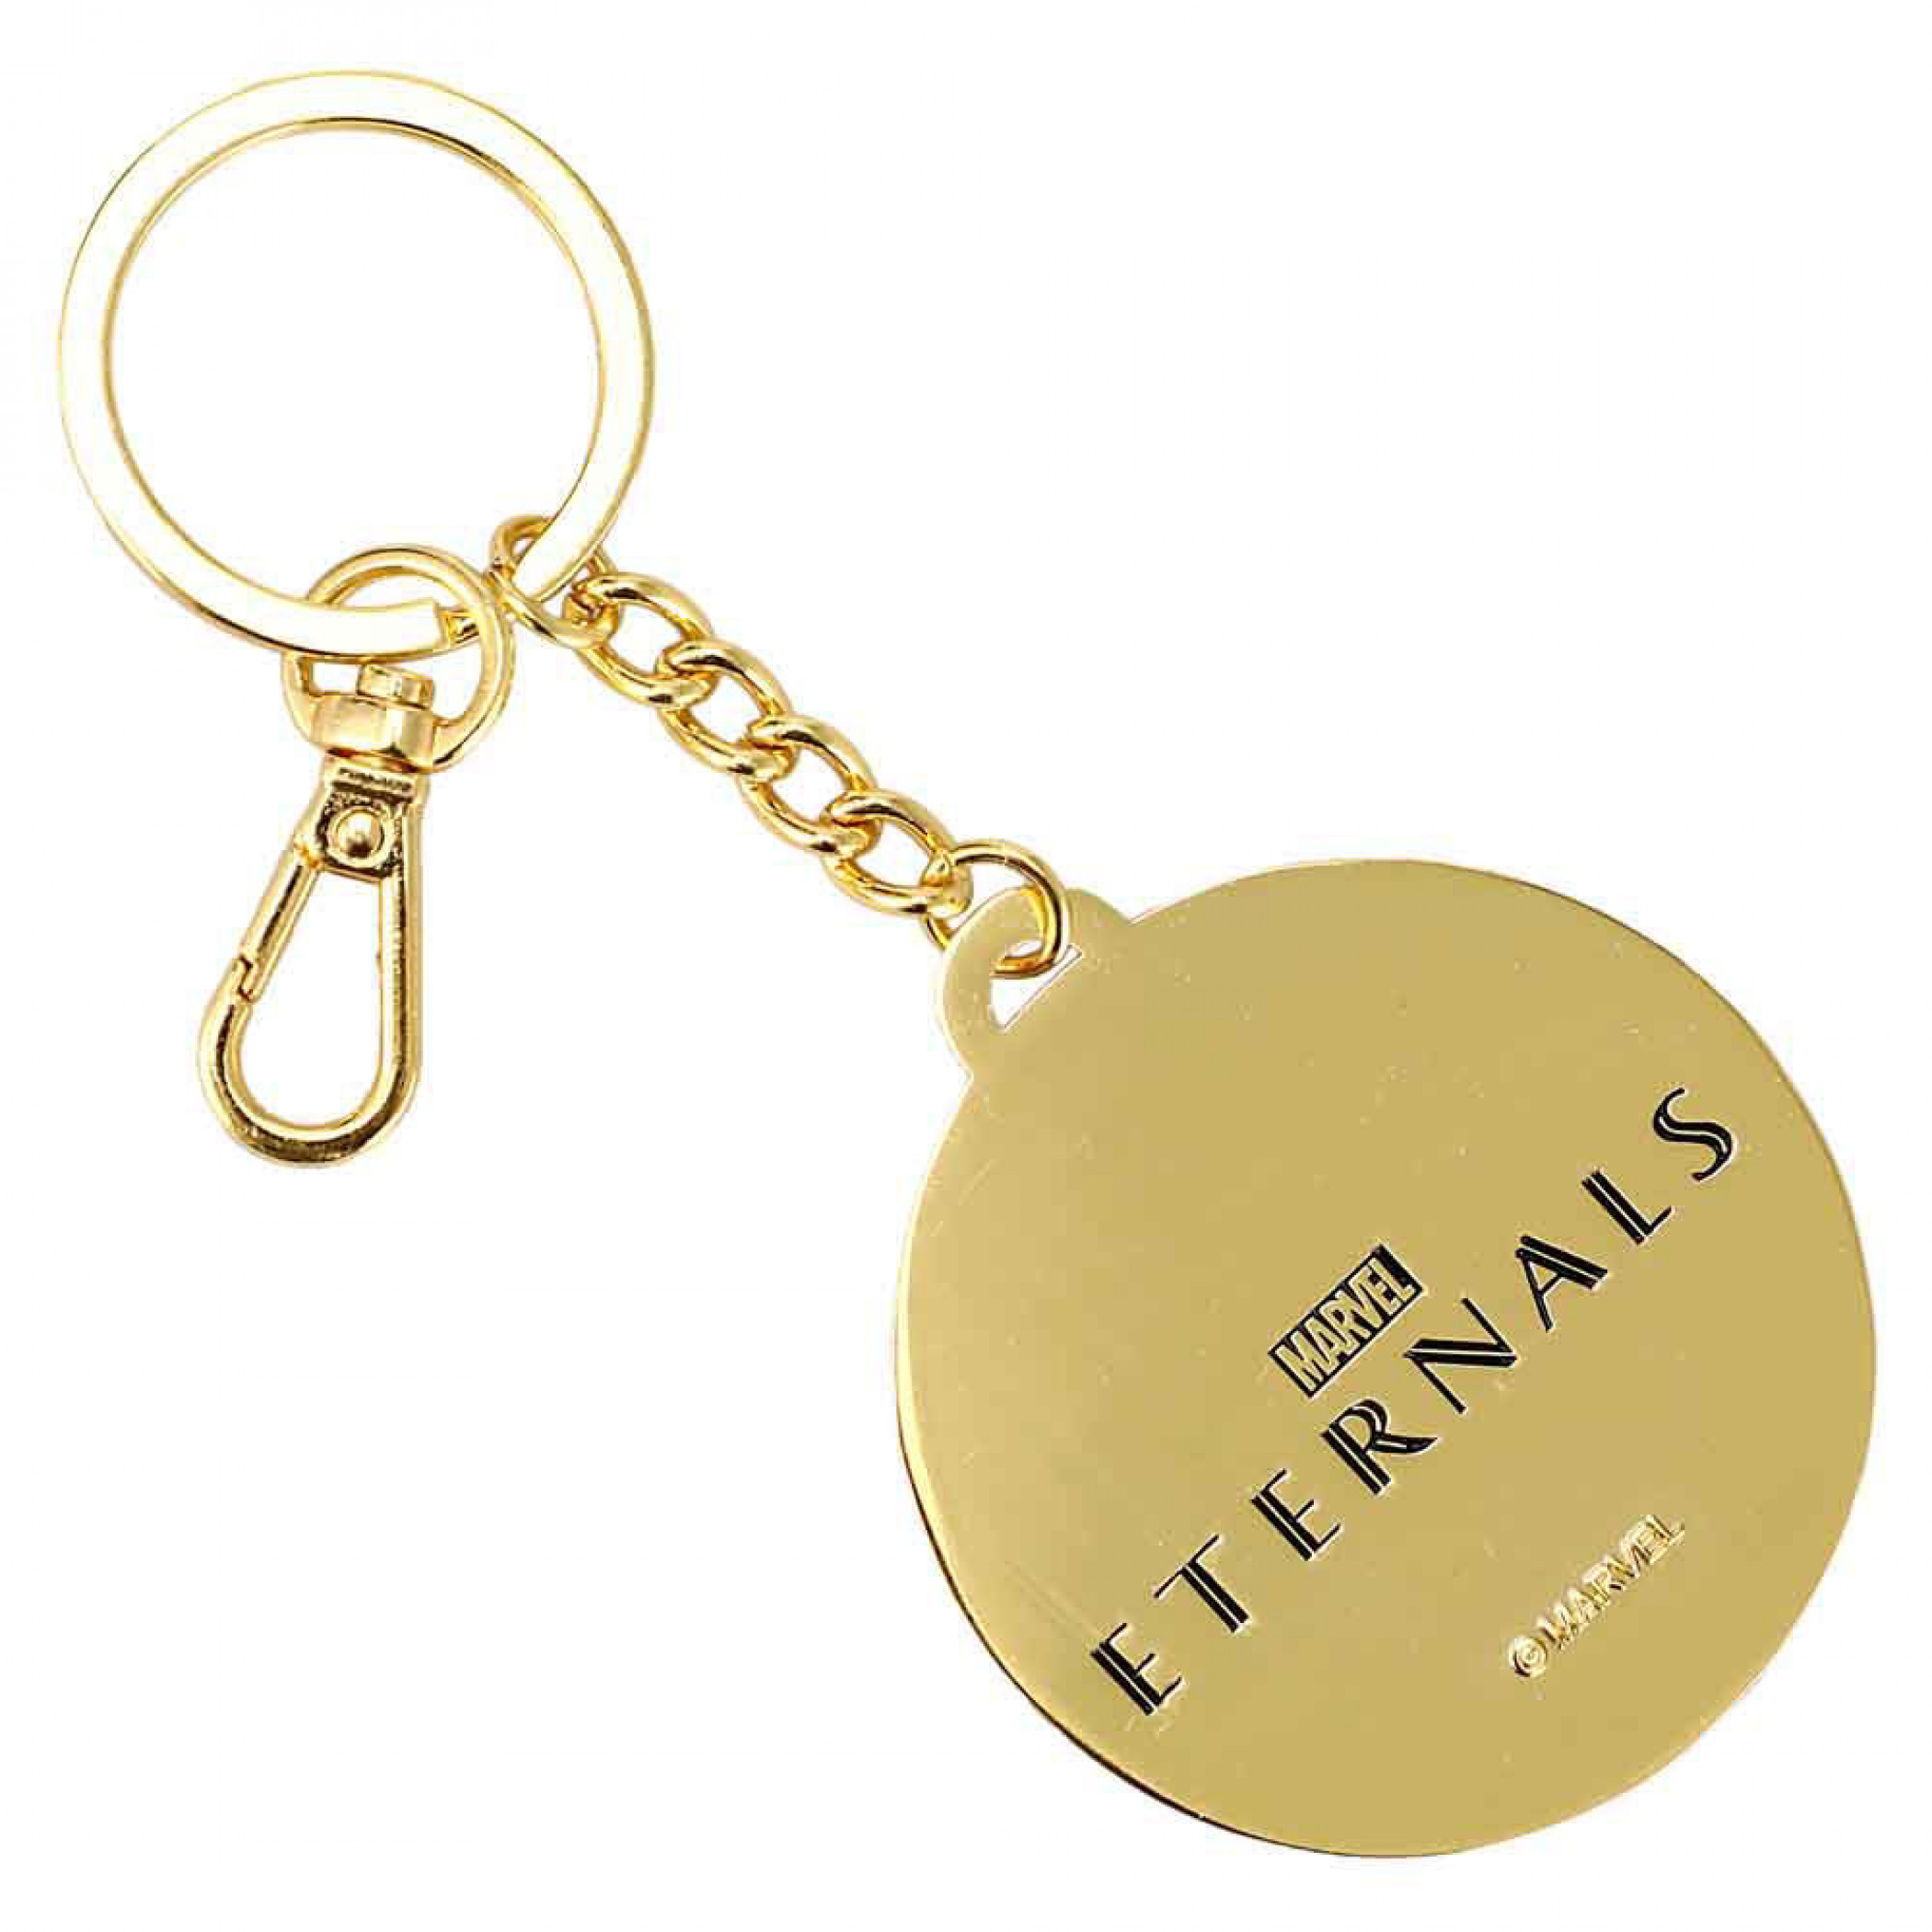 Marvel The Eternals Galactic Gold Metal Keychain